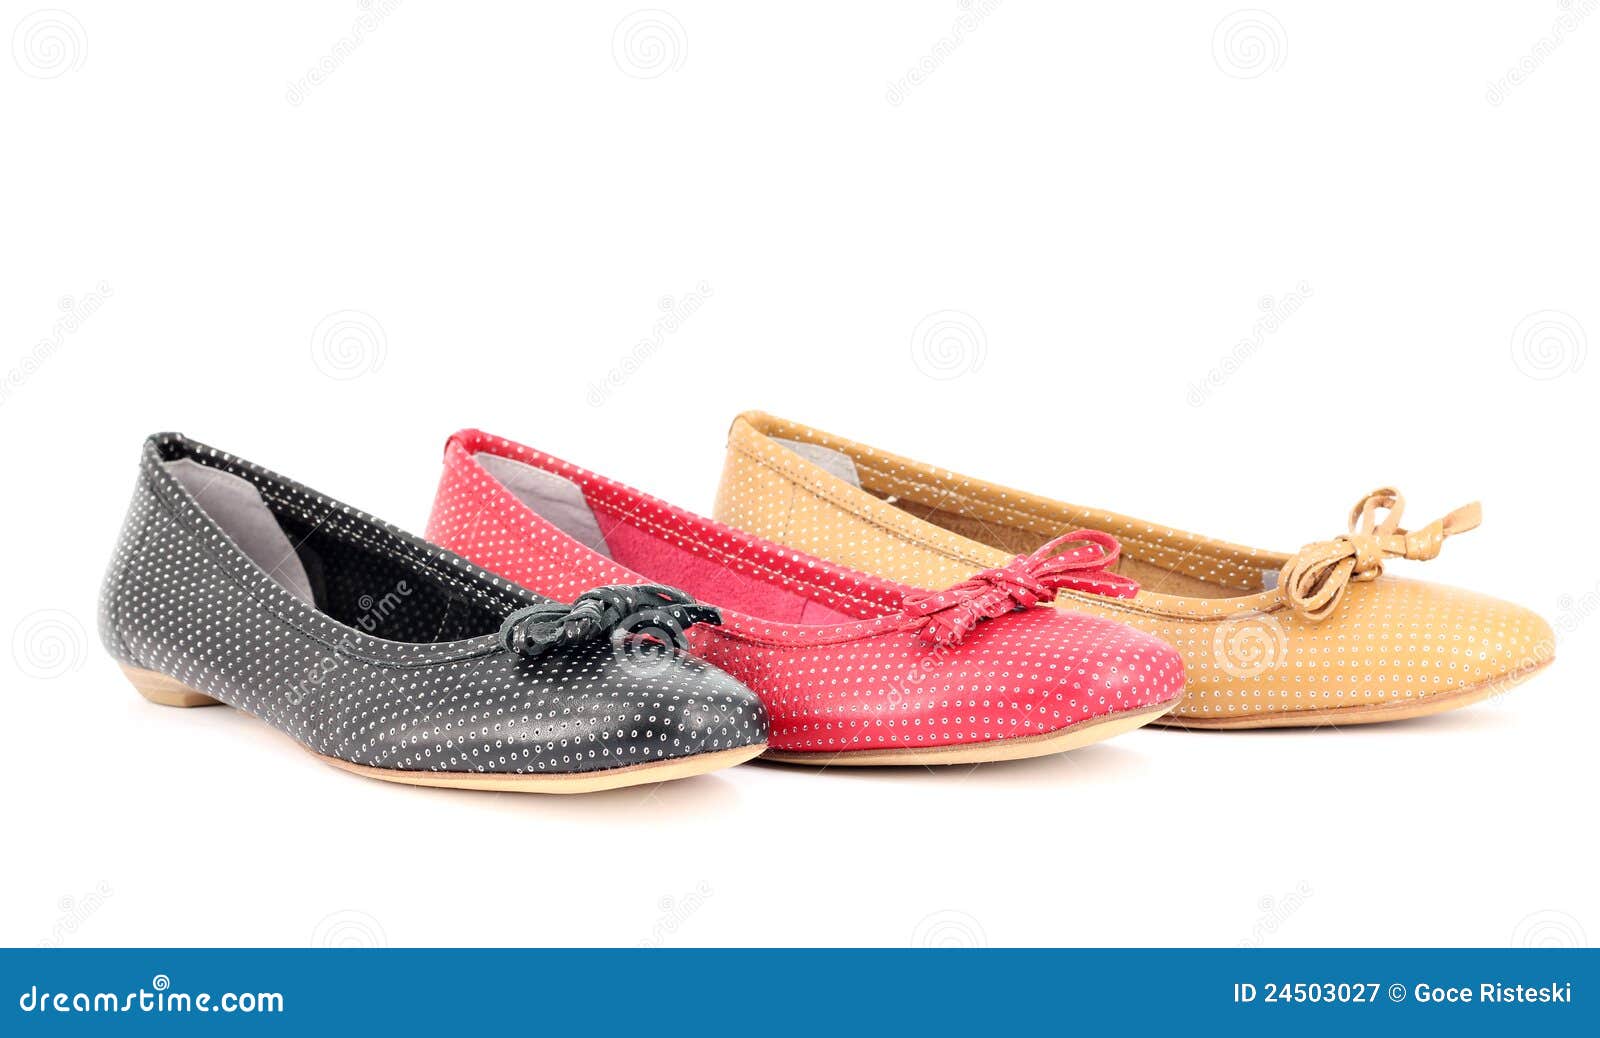 Women ballet flat shoes stock image. Image of shoes, woman - 24503027